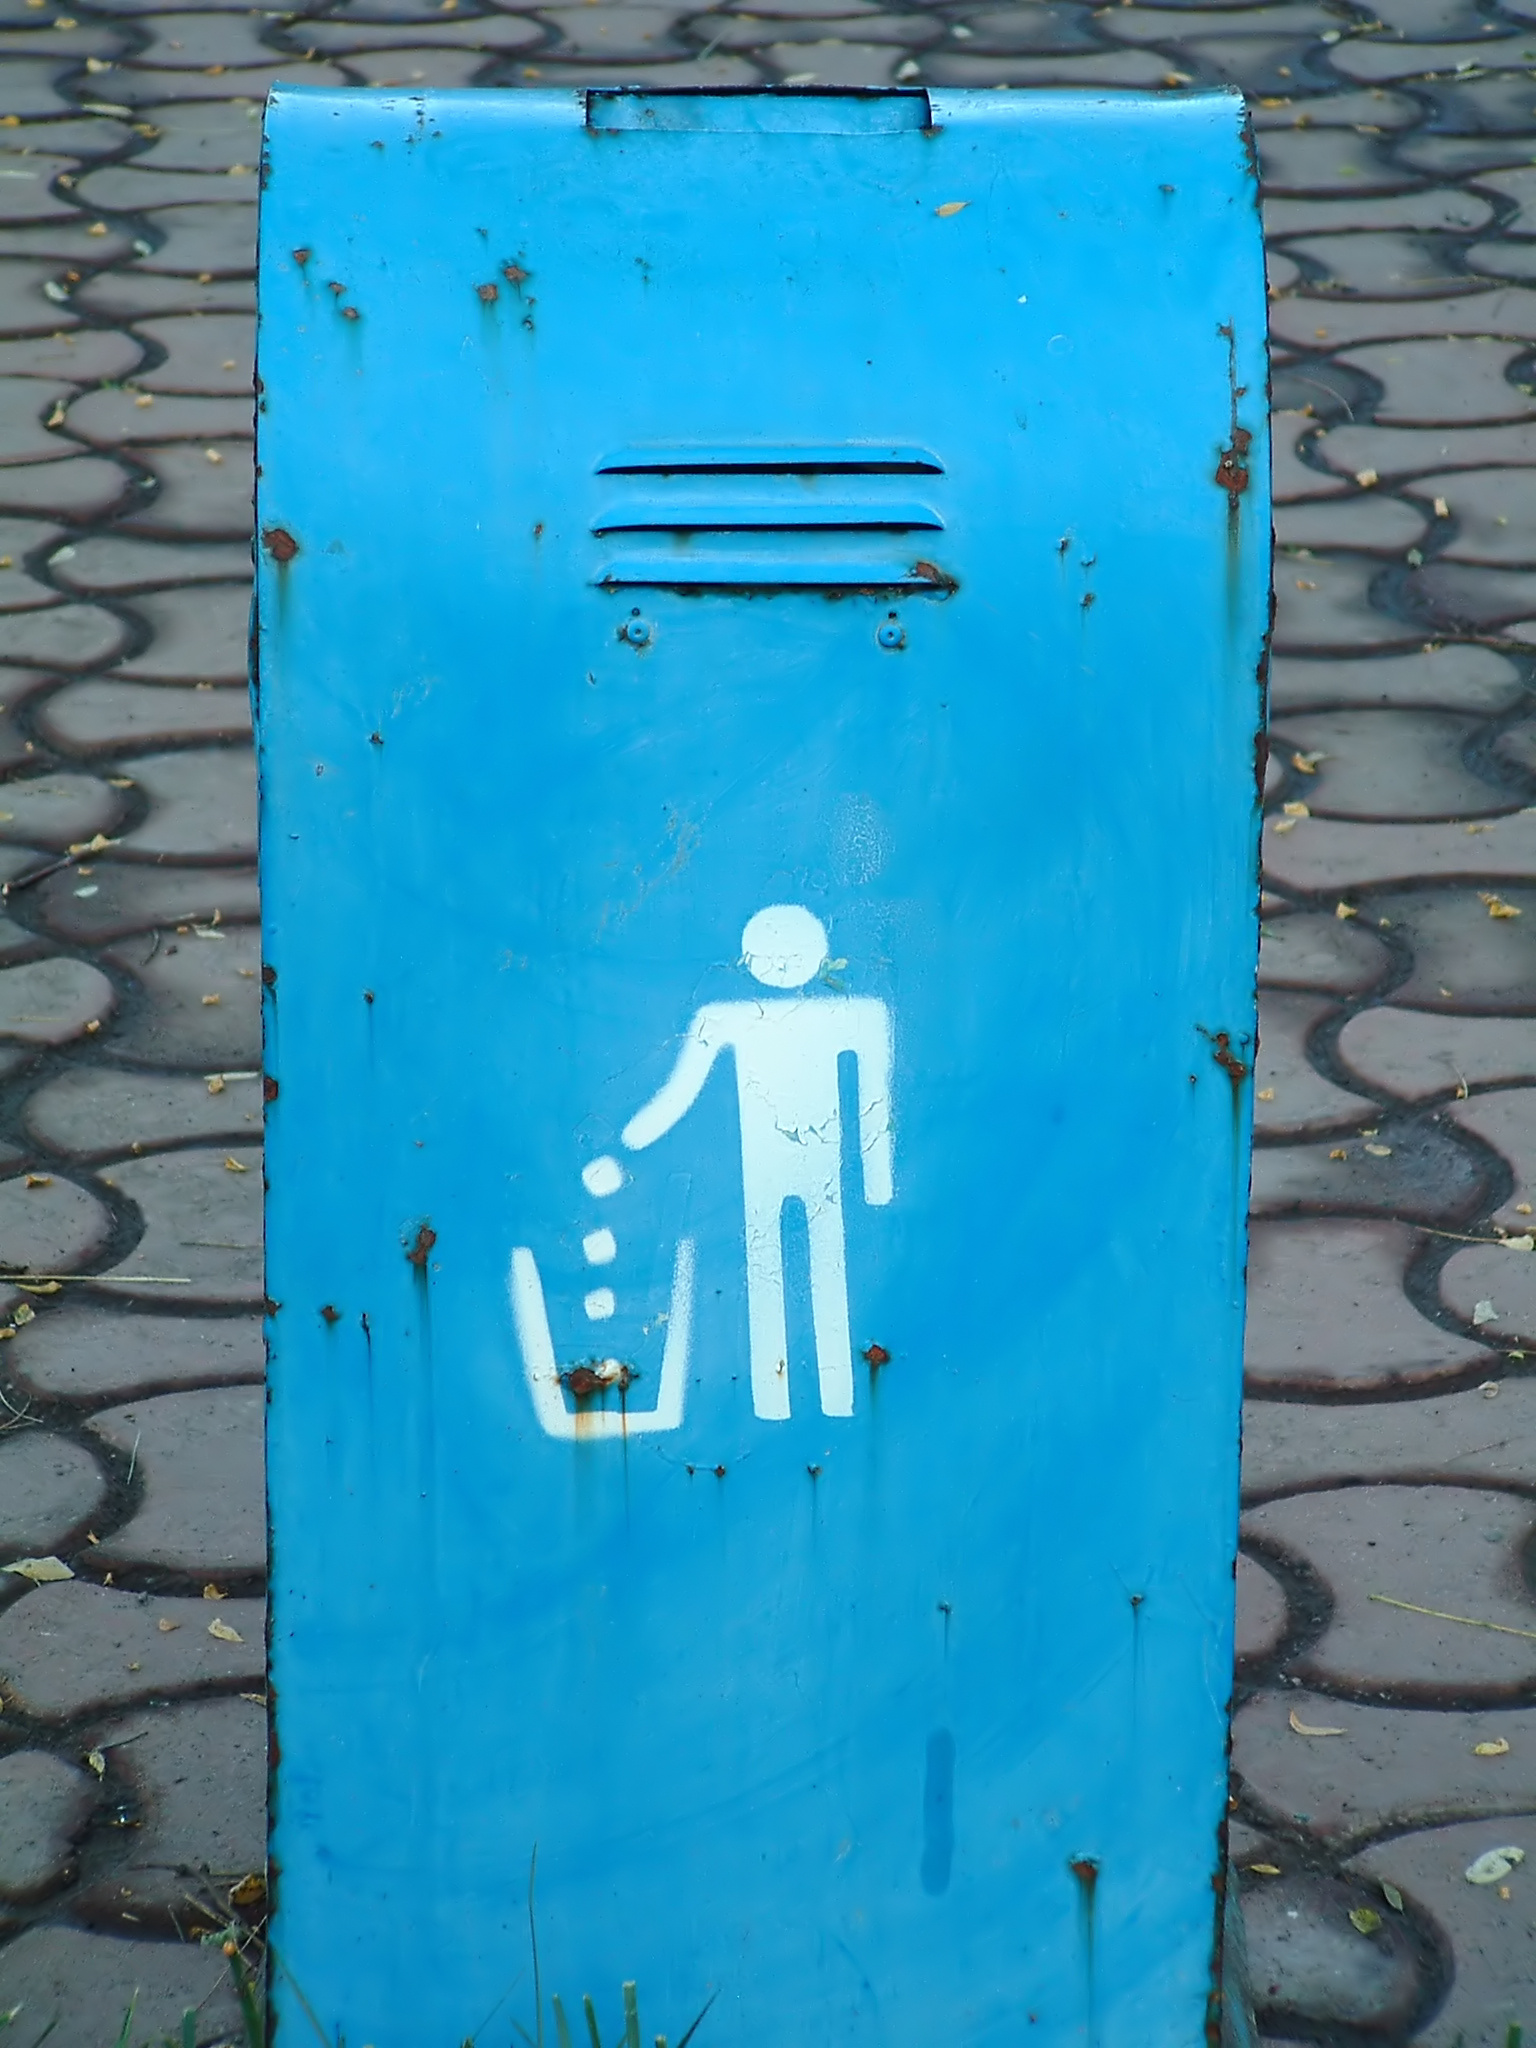 garbage collect sign on dustbin